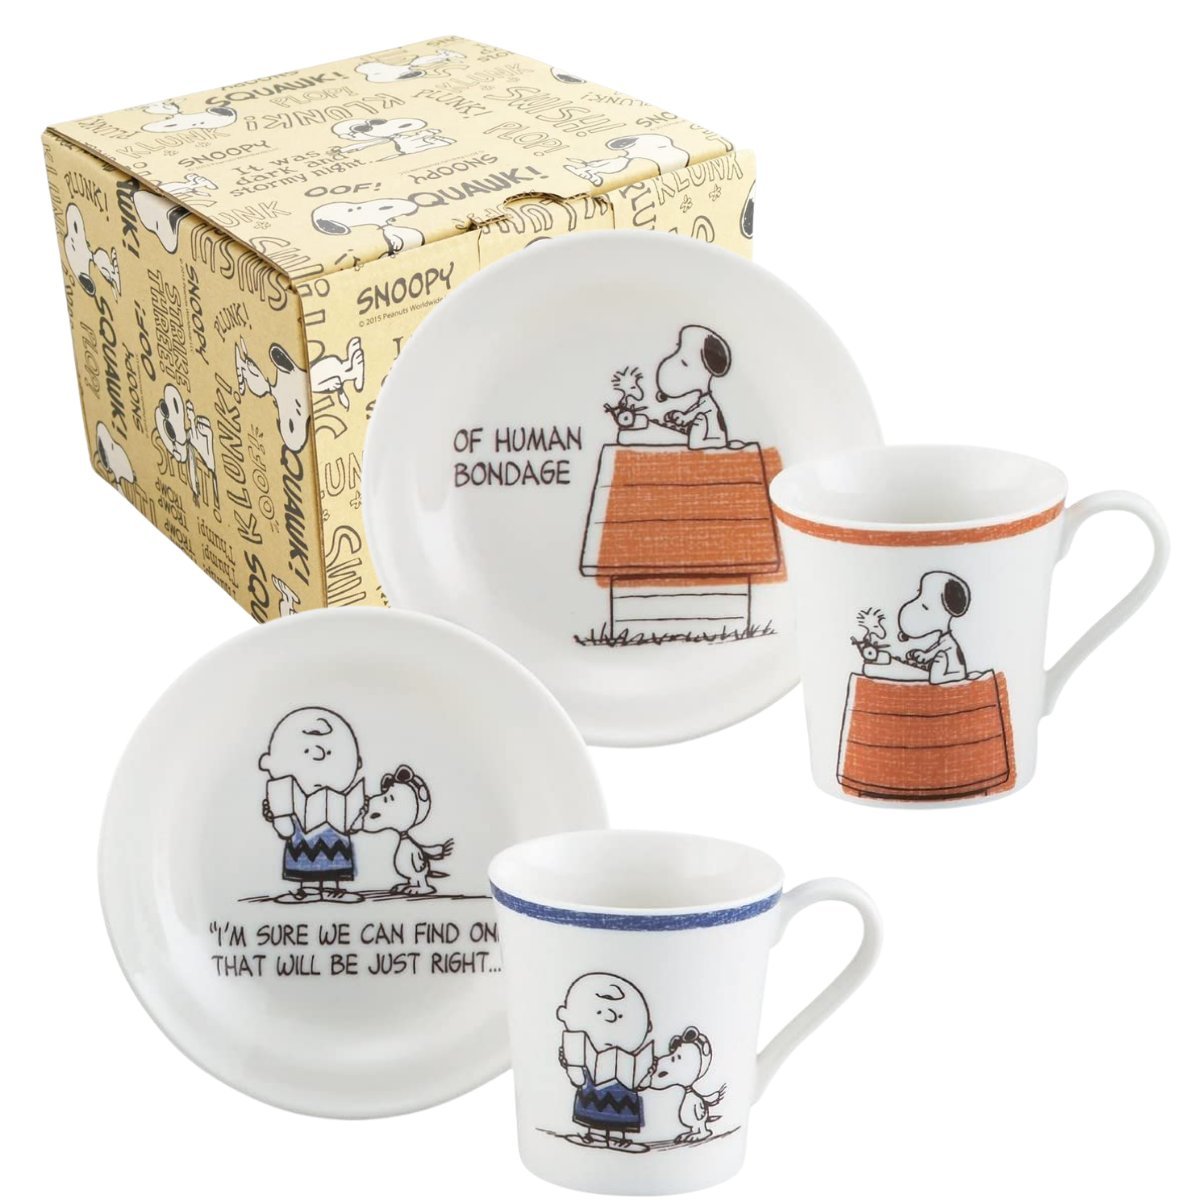 Peanuts Snoopy Made In Japan Peanuts Snoopy Mug And Plate Set Snoopy Plate Mug Set Of 2 Snoopy Morning Mug Plate Plate Pair Set With Presentation Box Recommend As Gift